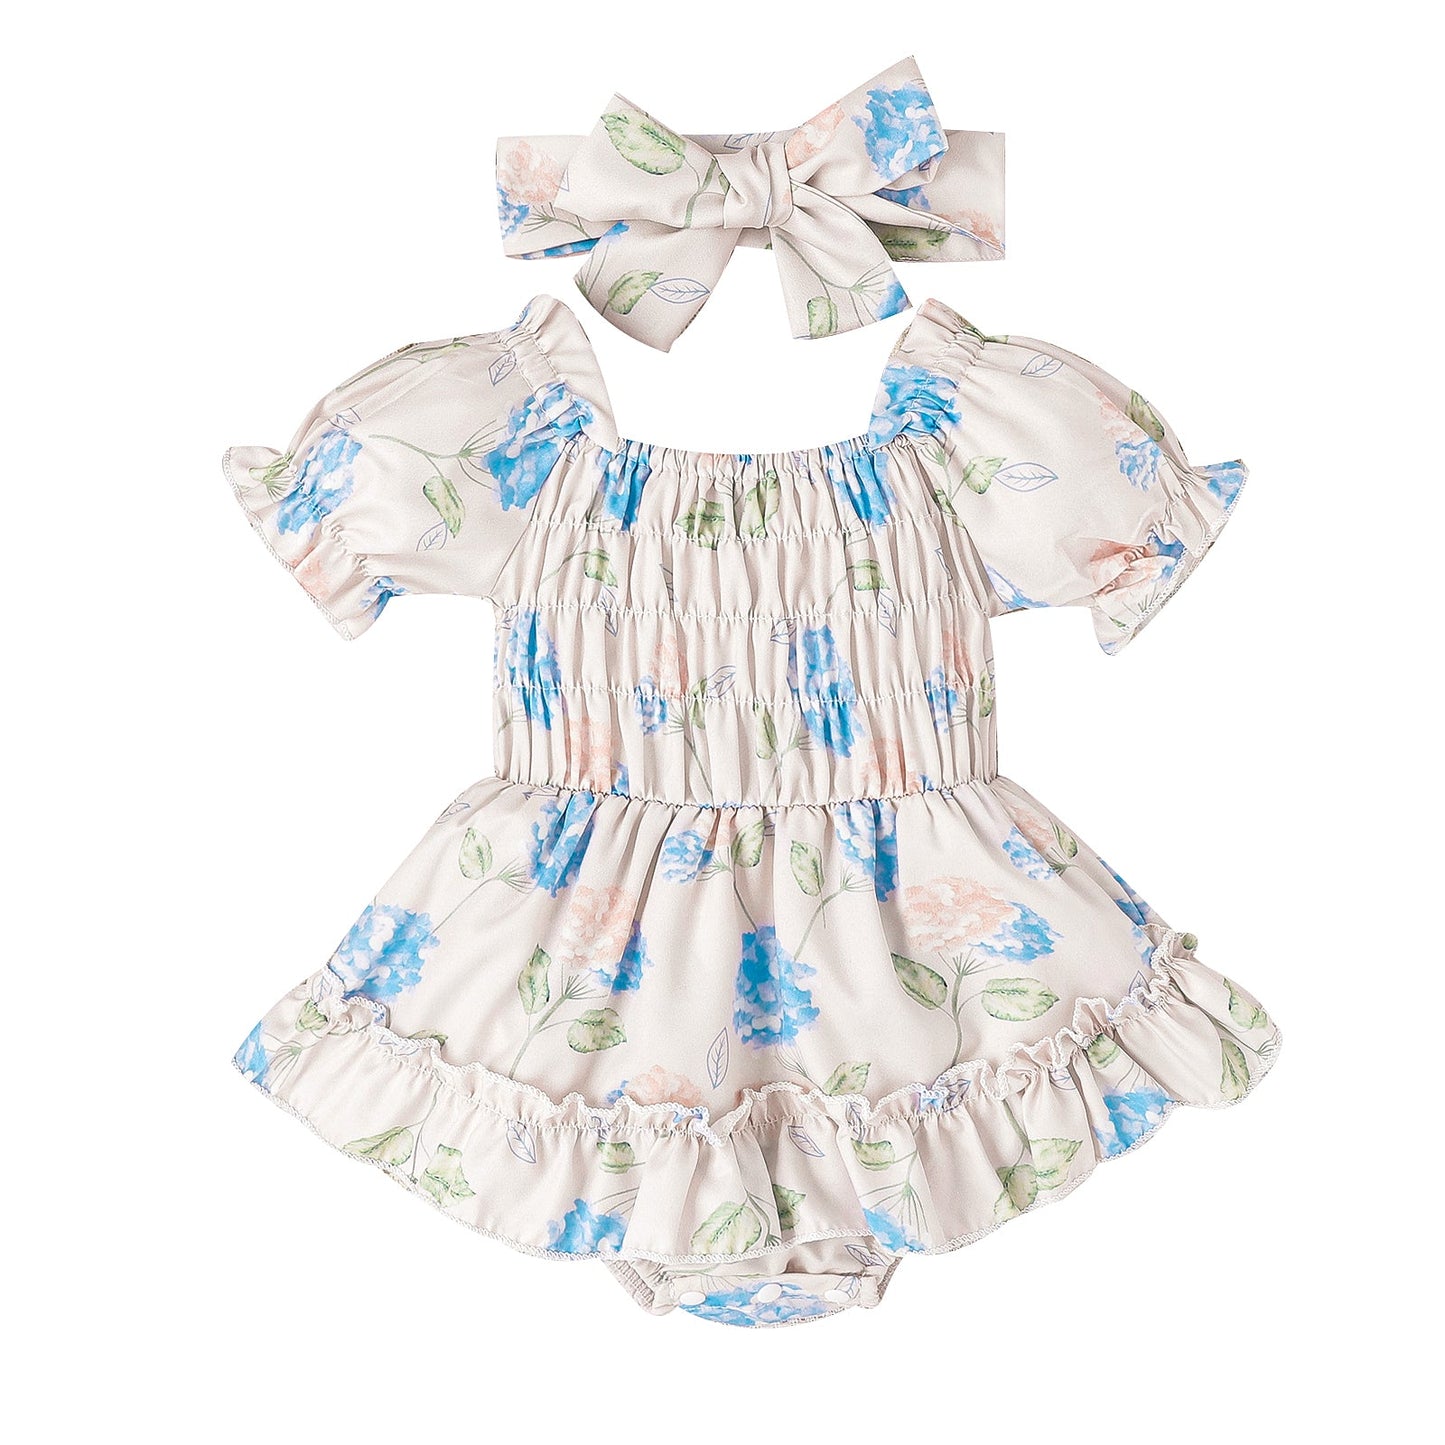 2-piece Baby Floral Dress